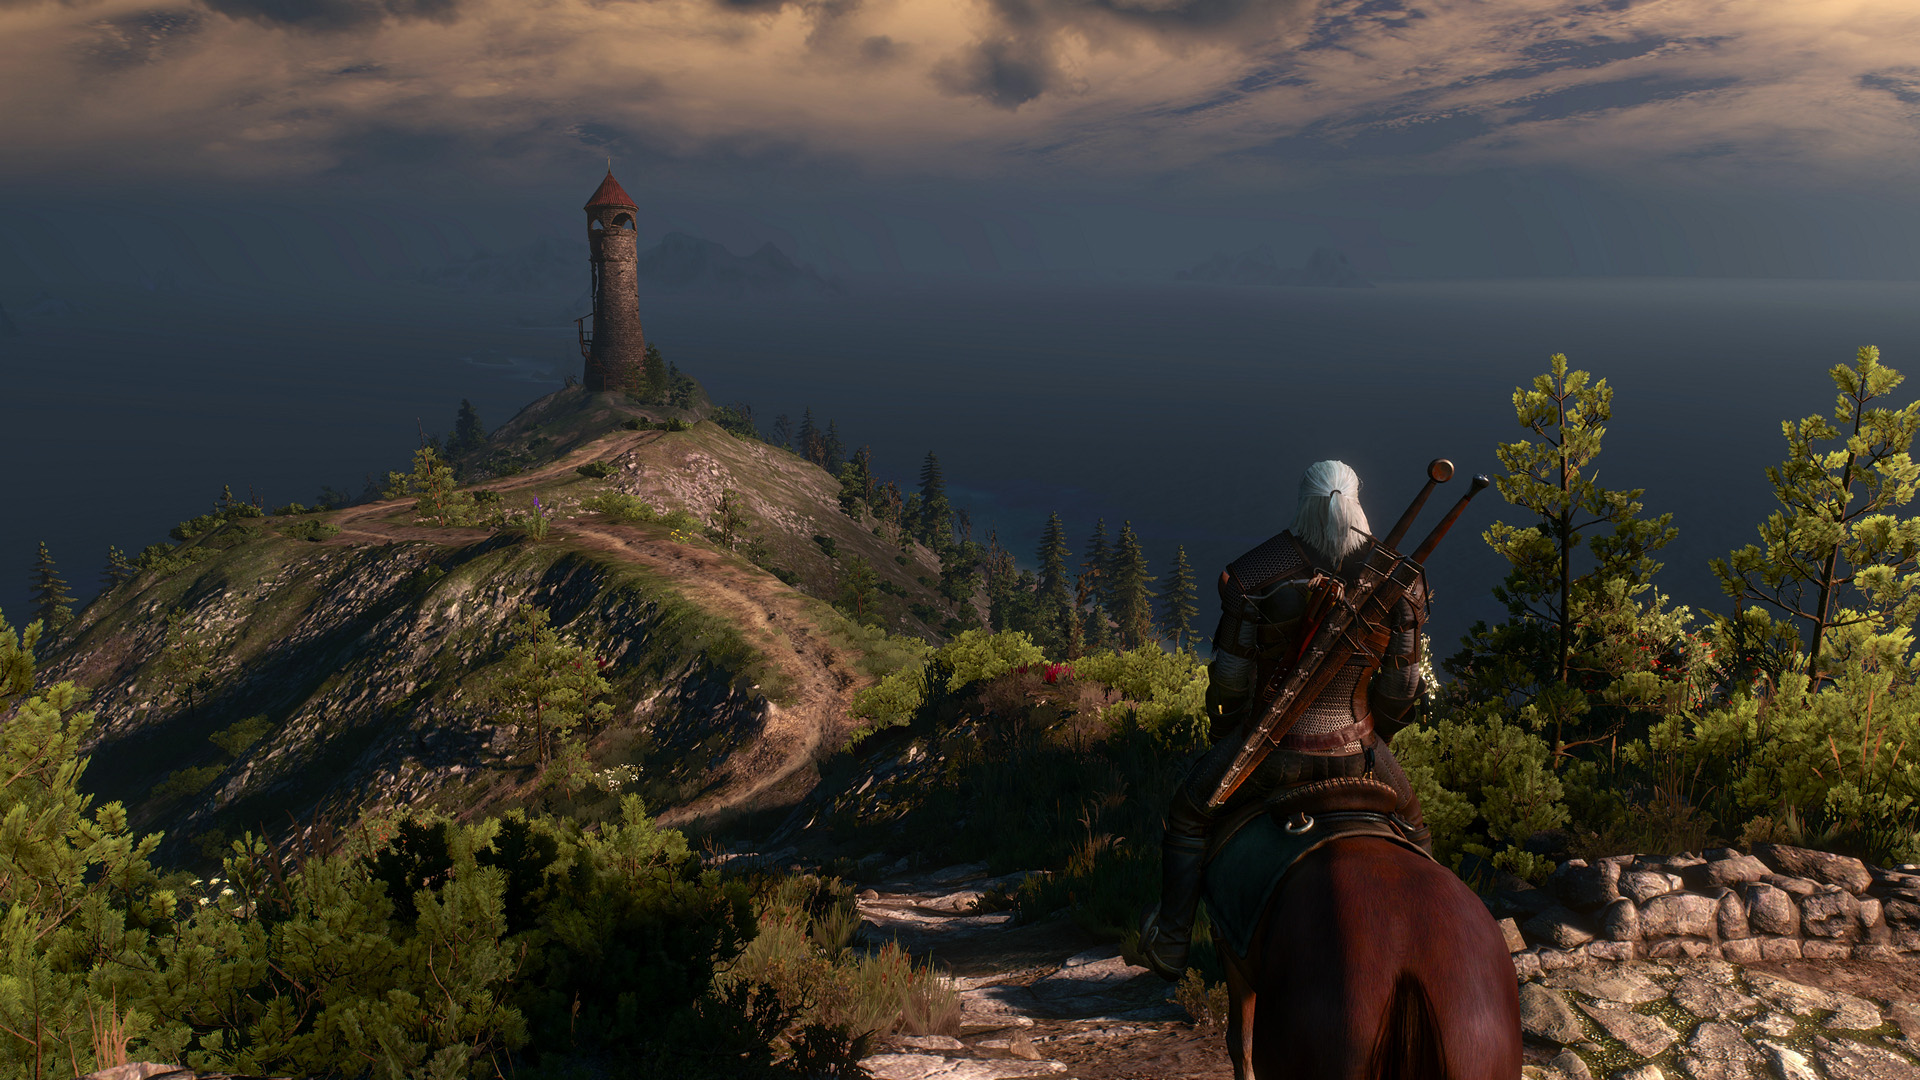 The Witcher 3: 1080p/60fps Gameplay For PC On Ultra Settings